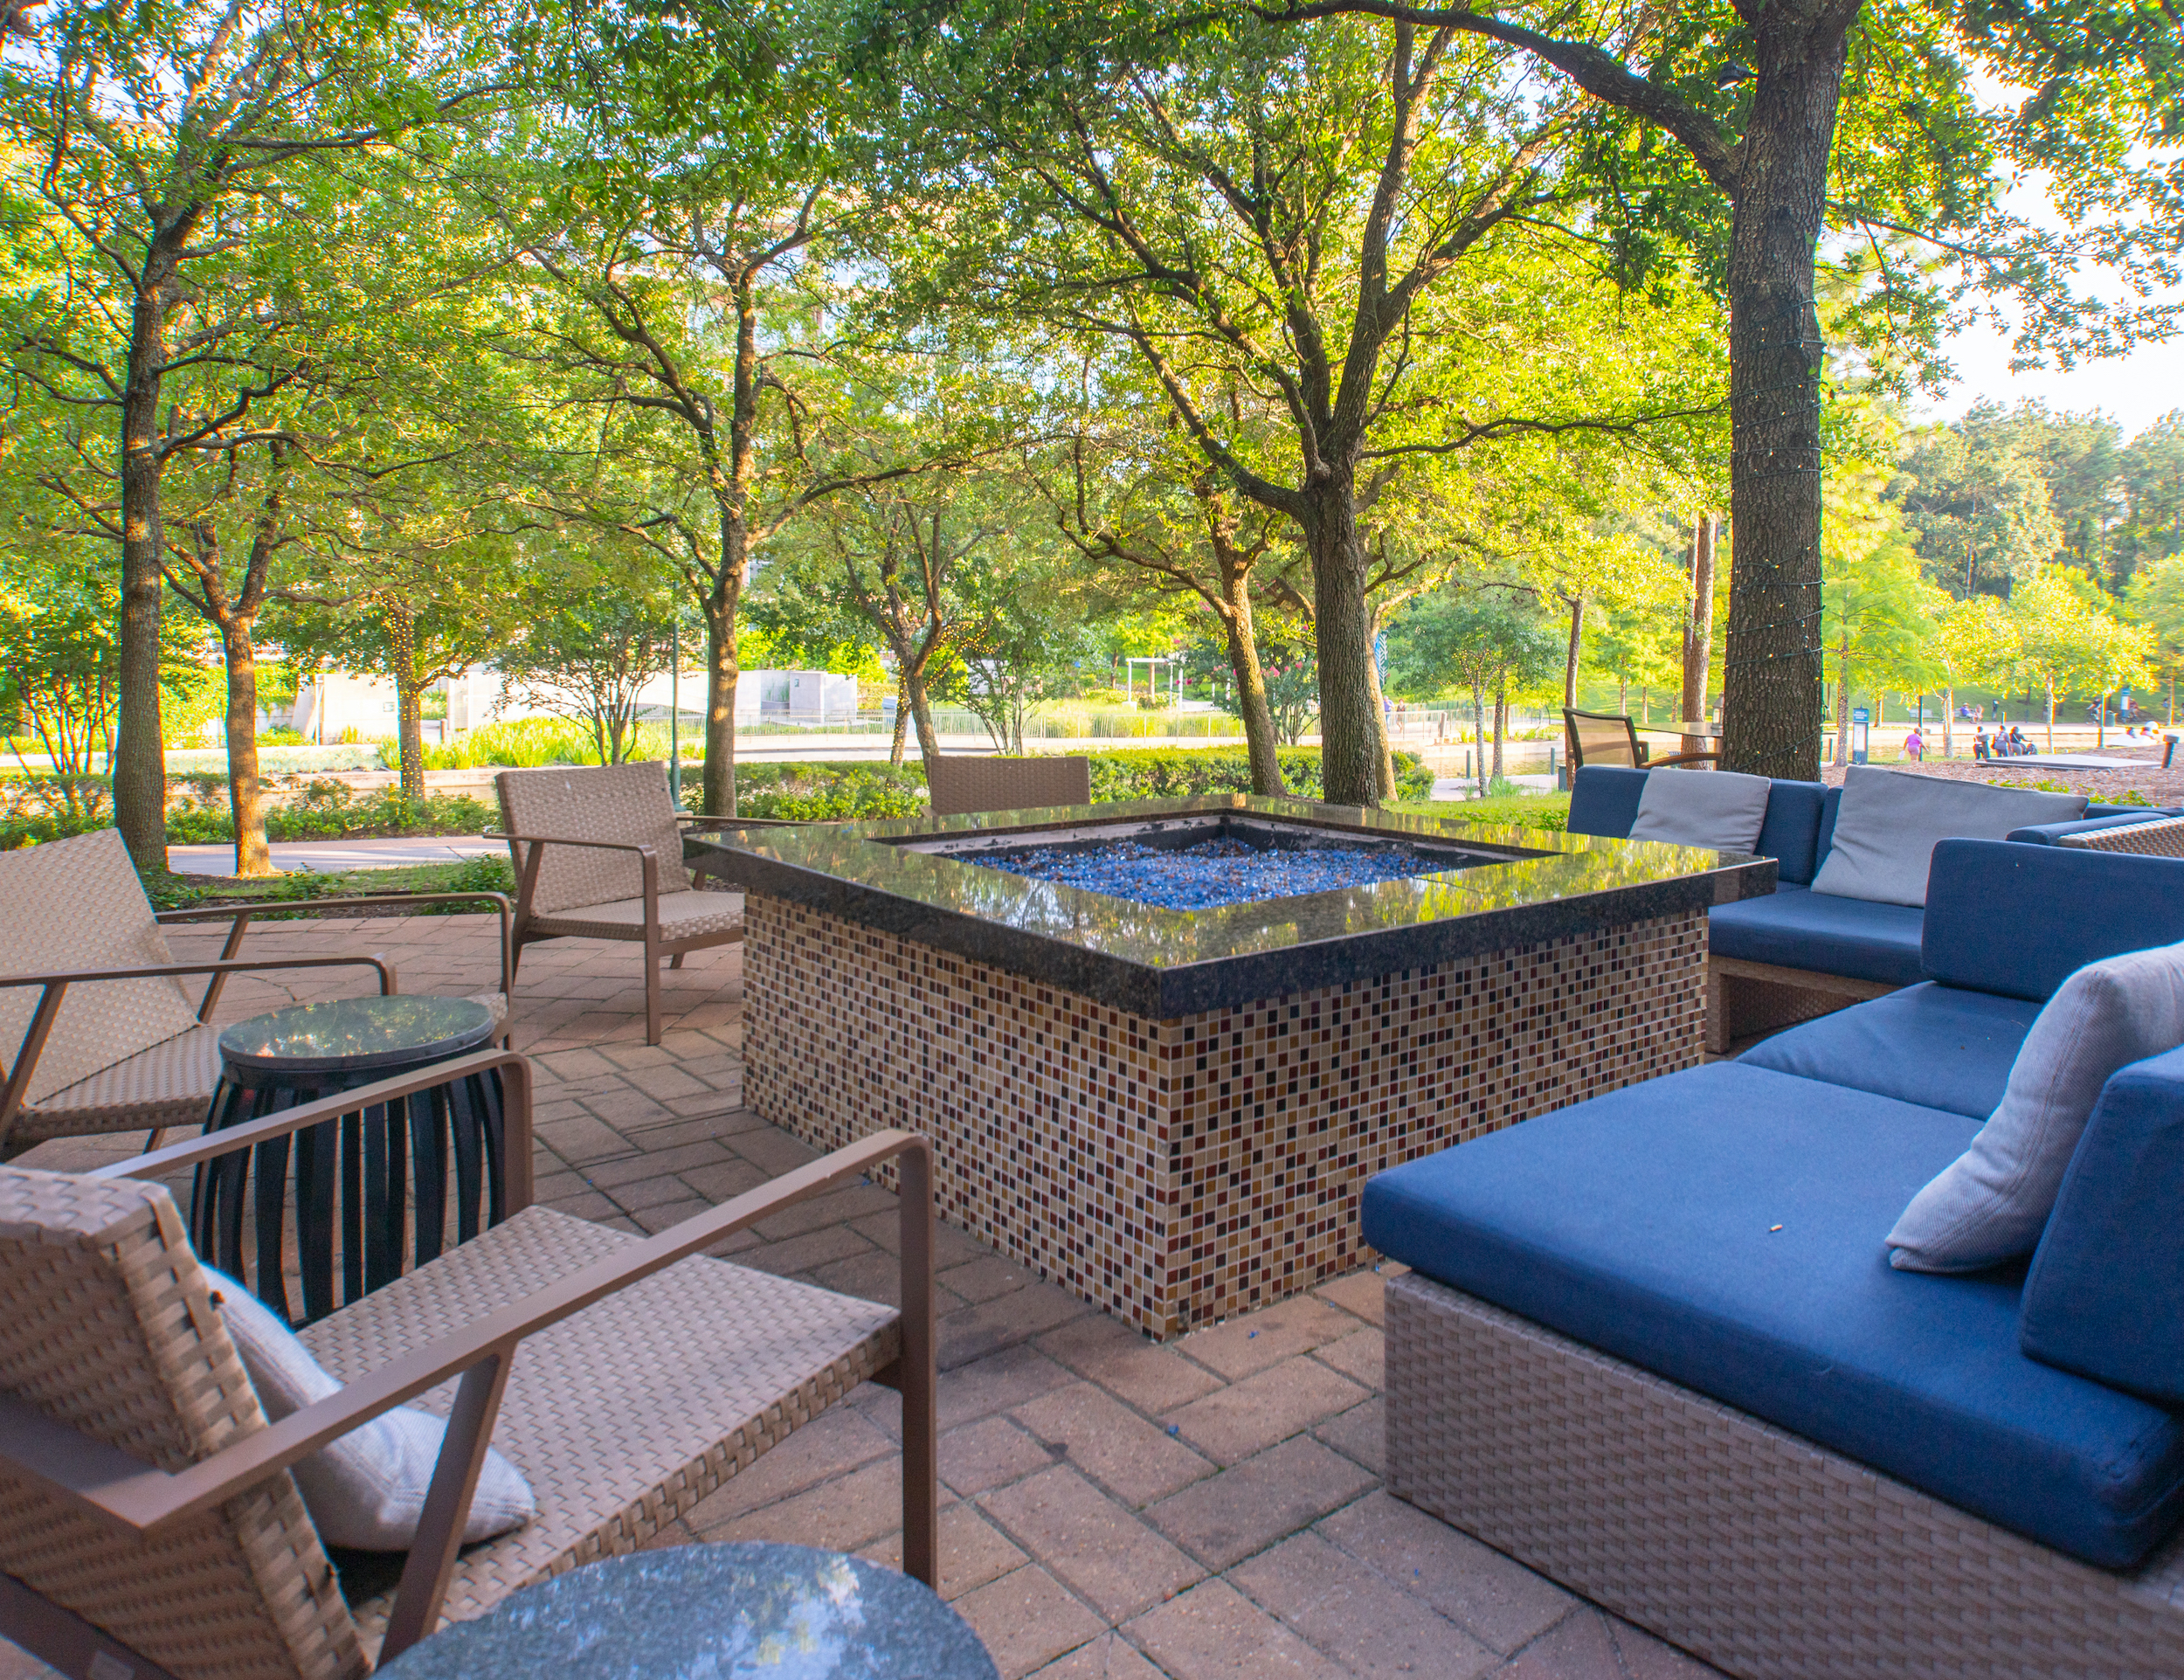 Blue-cushioned outdoor seating set on an outdoor patio with a fireplace in the center, both overlooking the trail and Woodlands Waterway canal at the a Marriott hotel in the Woodlands, TX.